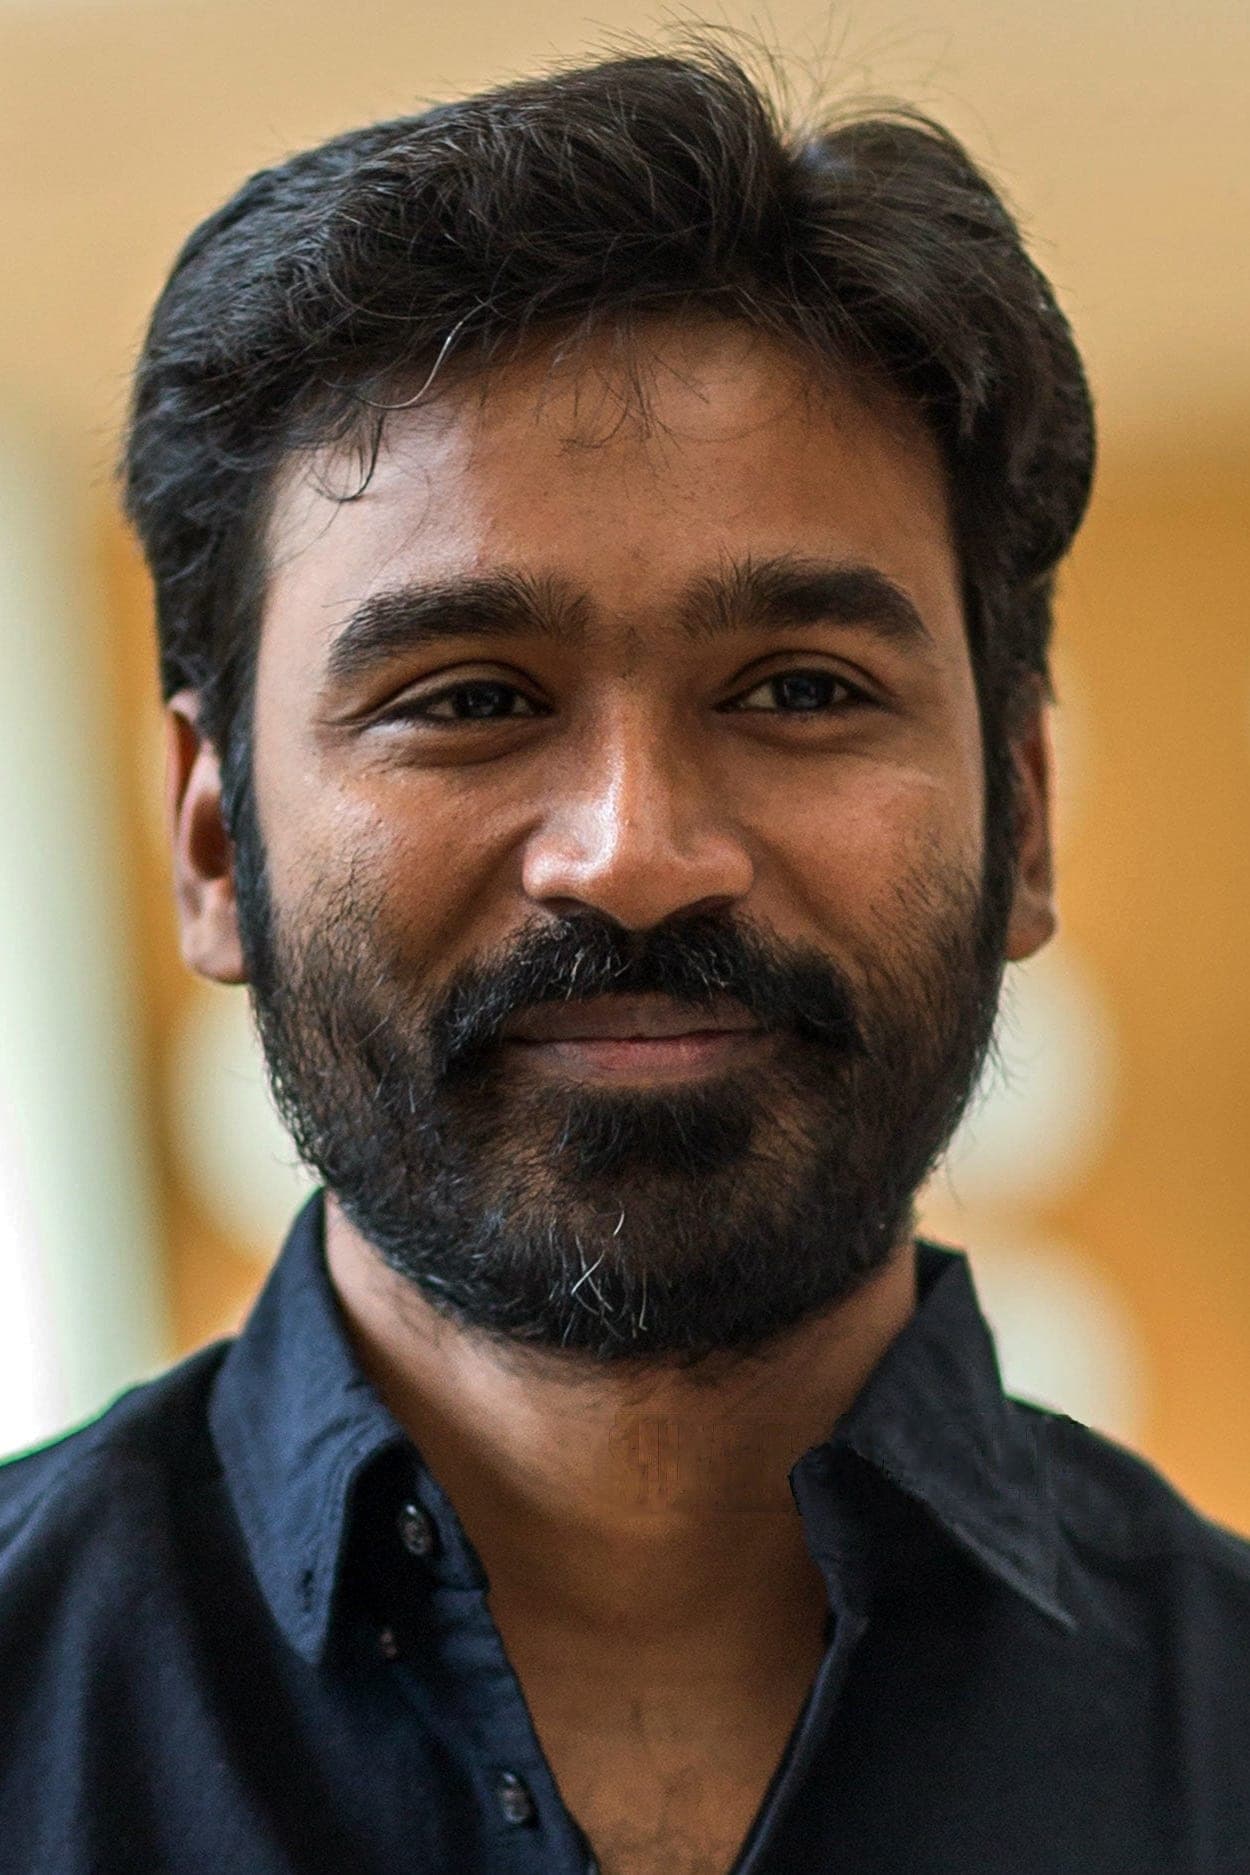 Dhanush | Special Appearance in "Local Boys" Song